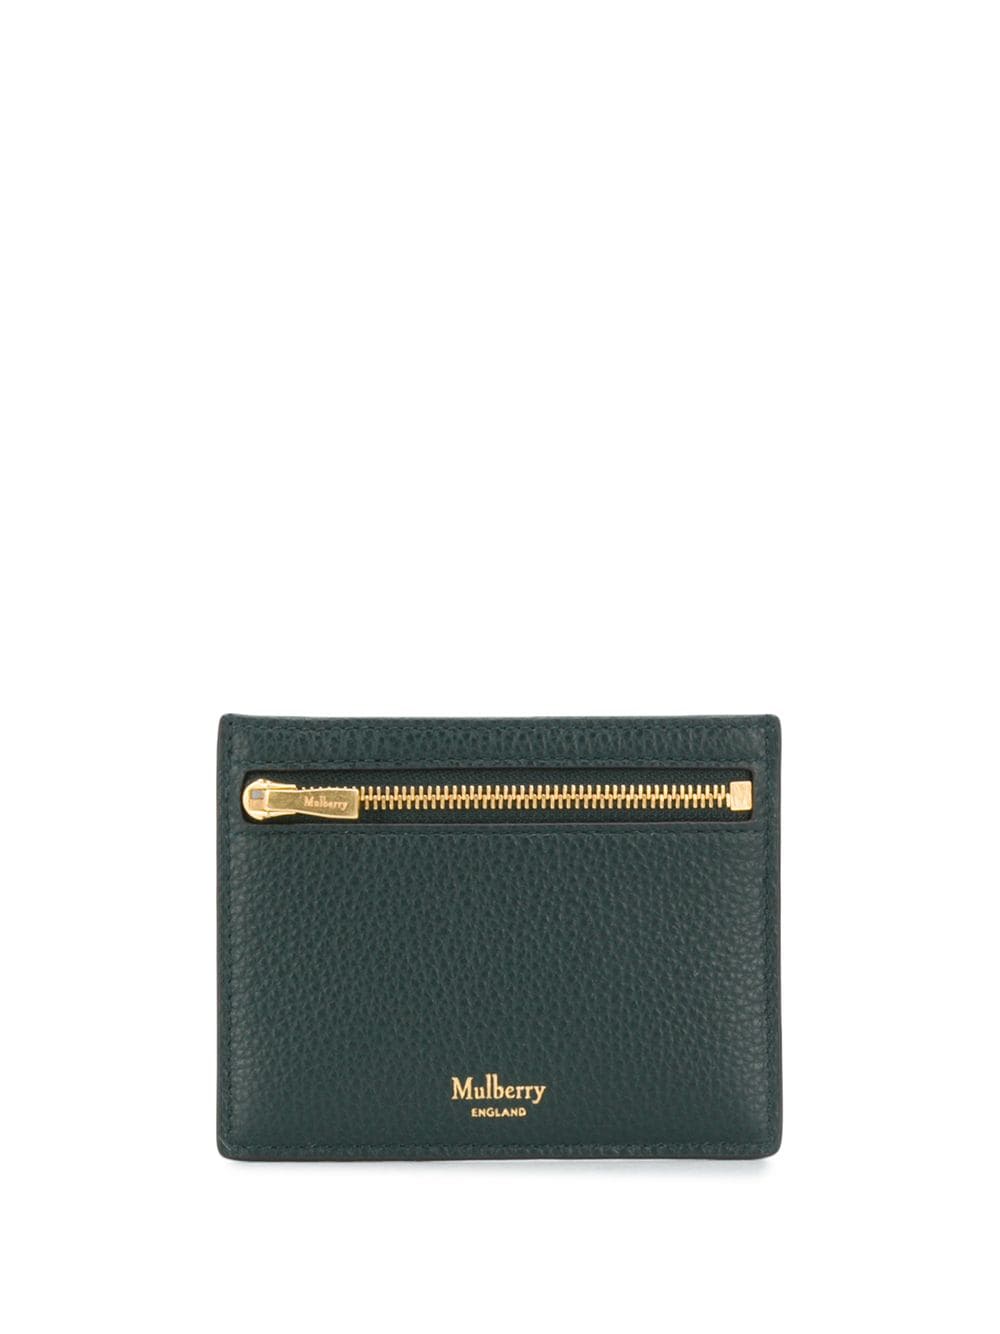 Mulberry compact logo cardholder - Green von Mulberry